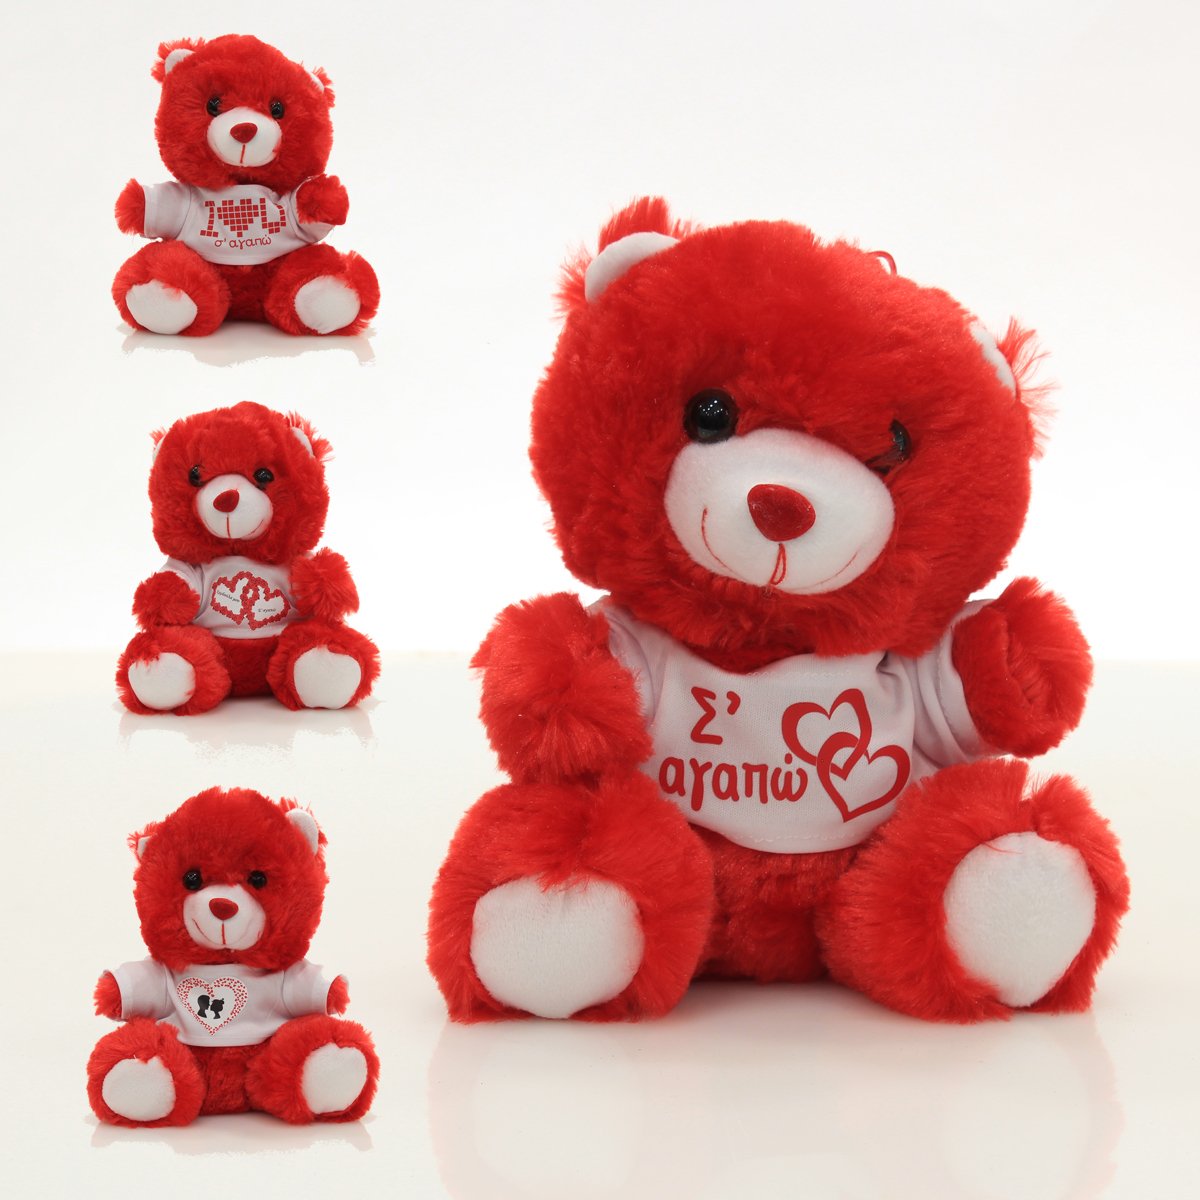 Teddy T-shirt with love messages- 20cm